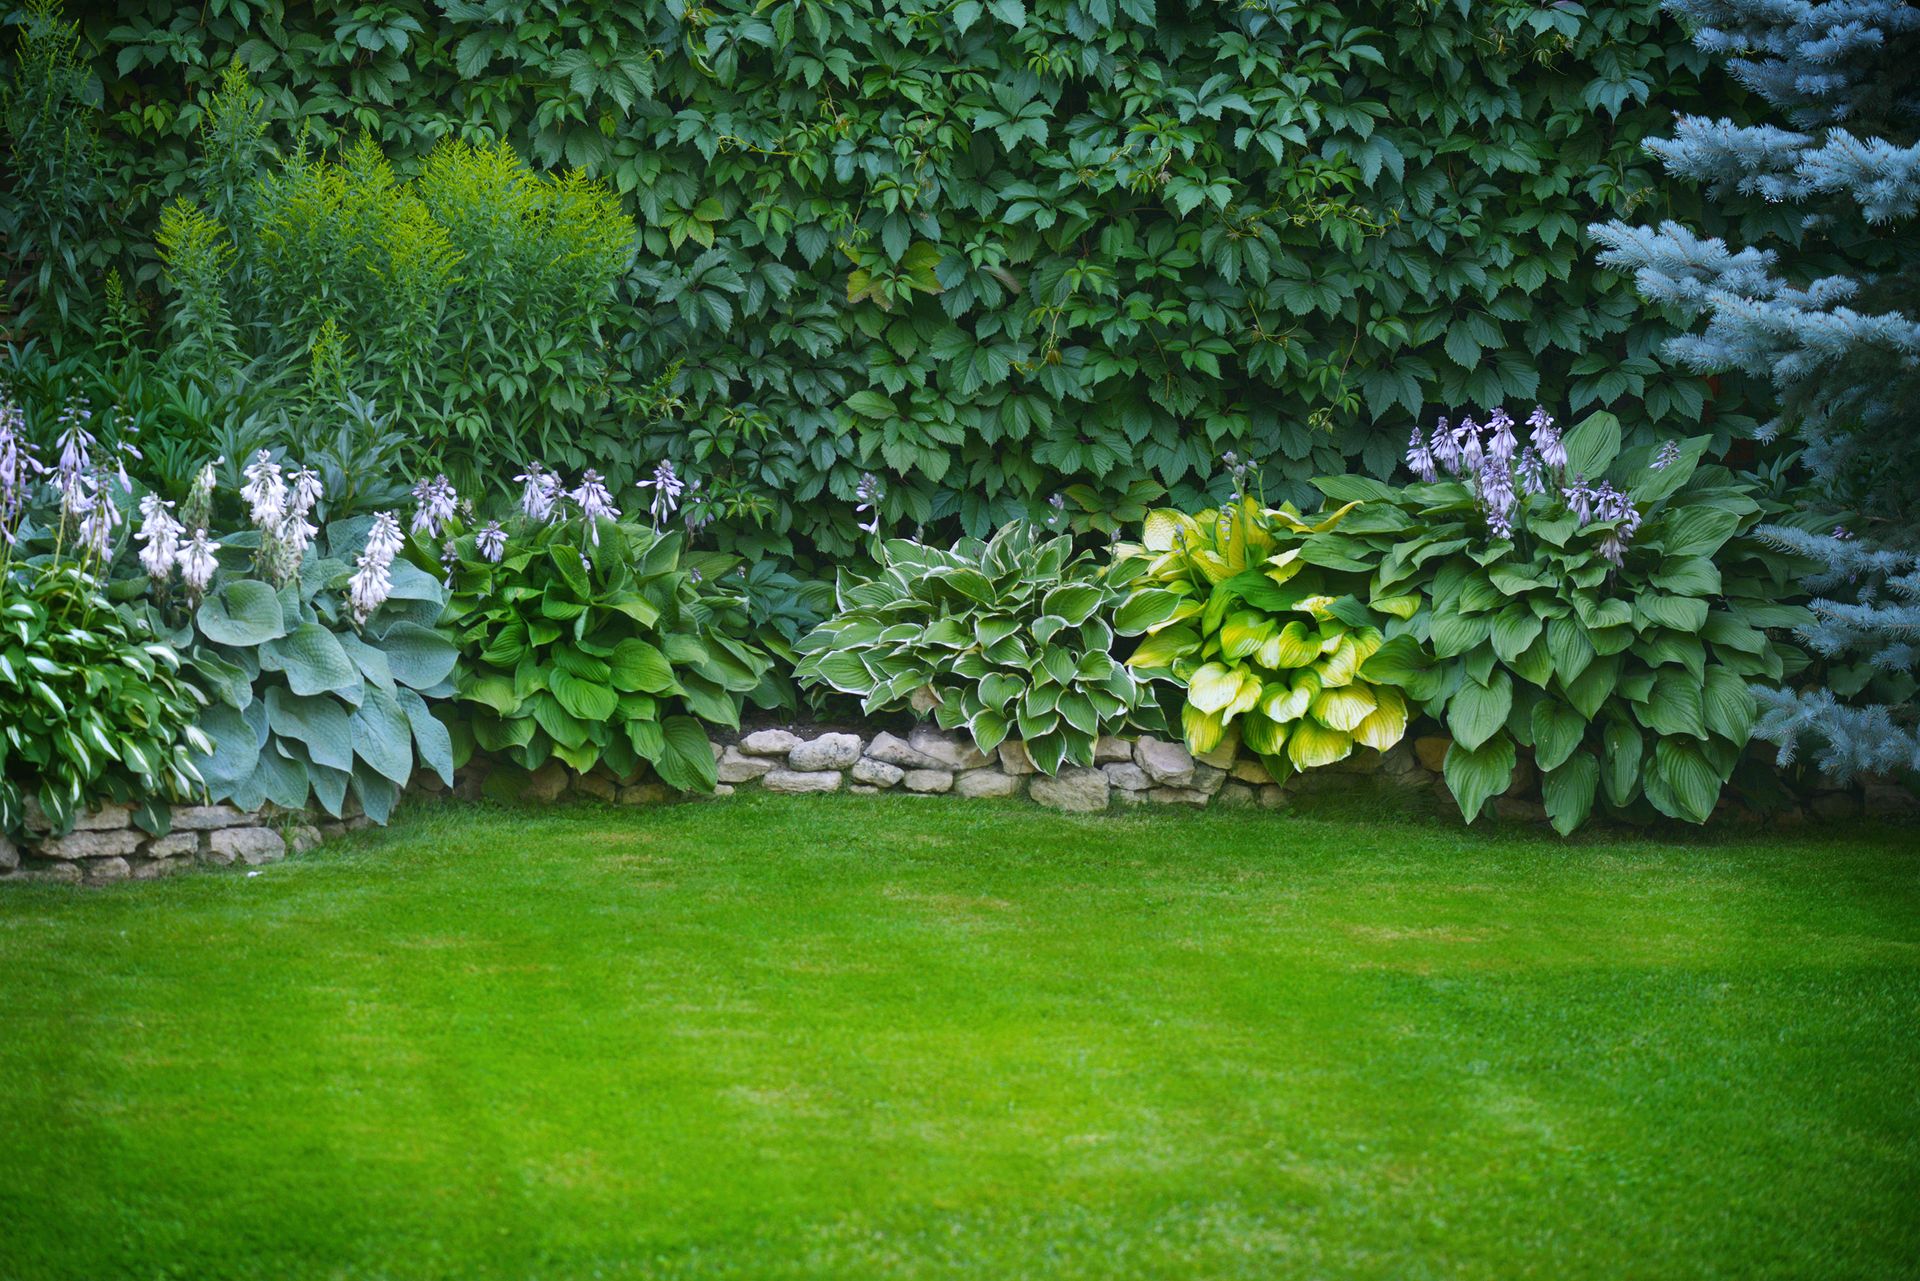 Lawn edging ideas: 13 ways to border your grass, from sleek paving to ...